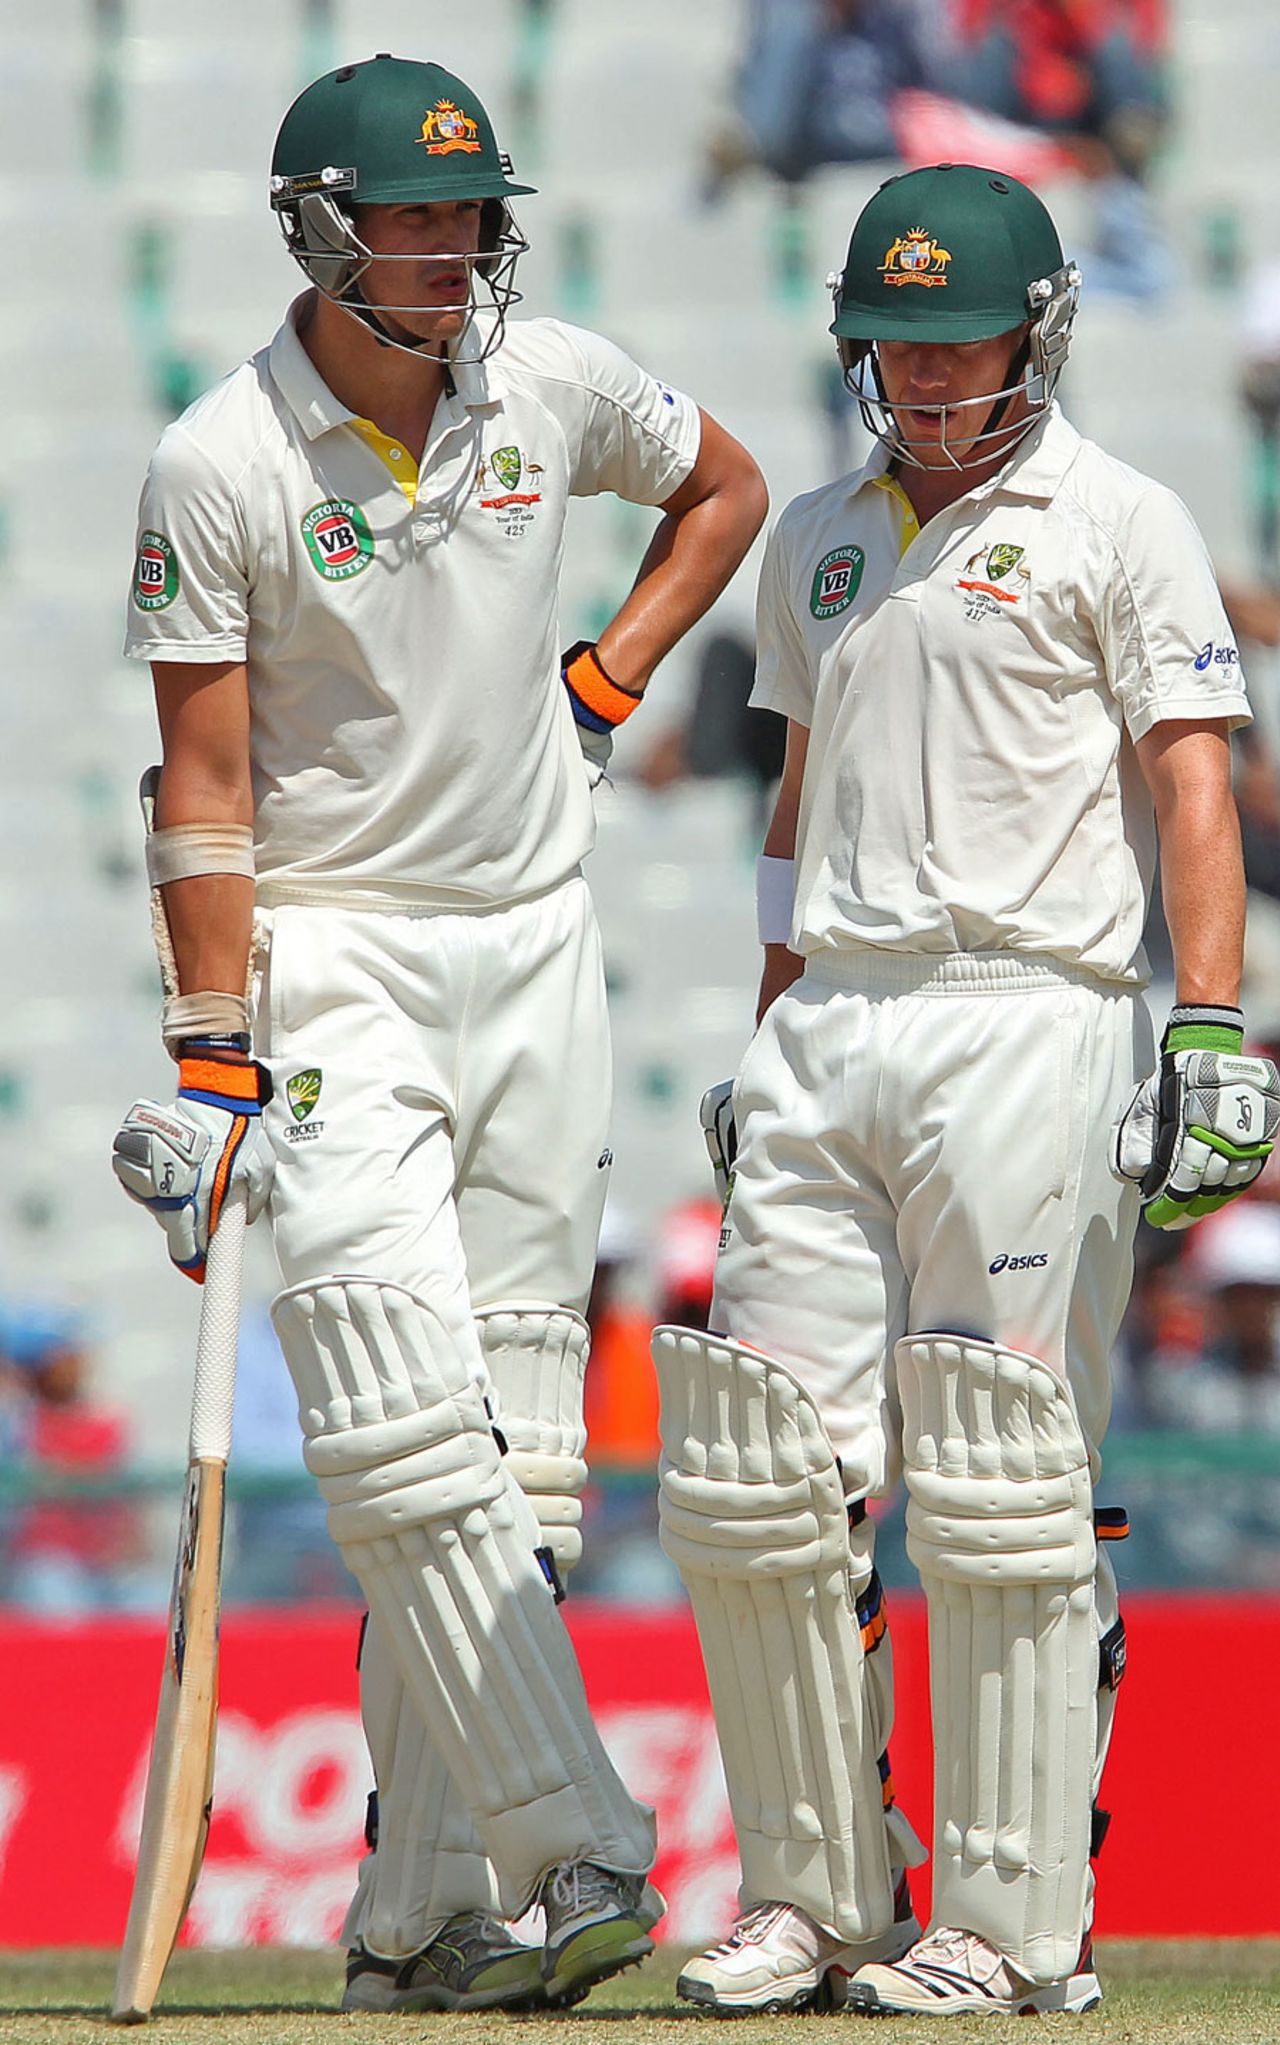 Mitchell Starc and Xavier Doherty added 44 for the final wicket, India v Australia, 3rd Test, Mohali, 5th day, March 18, 2013